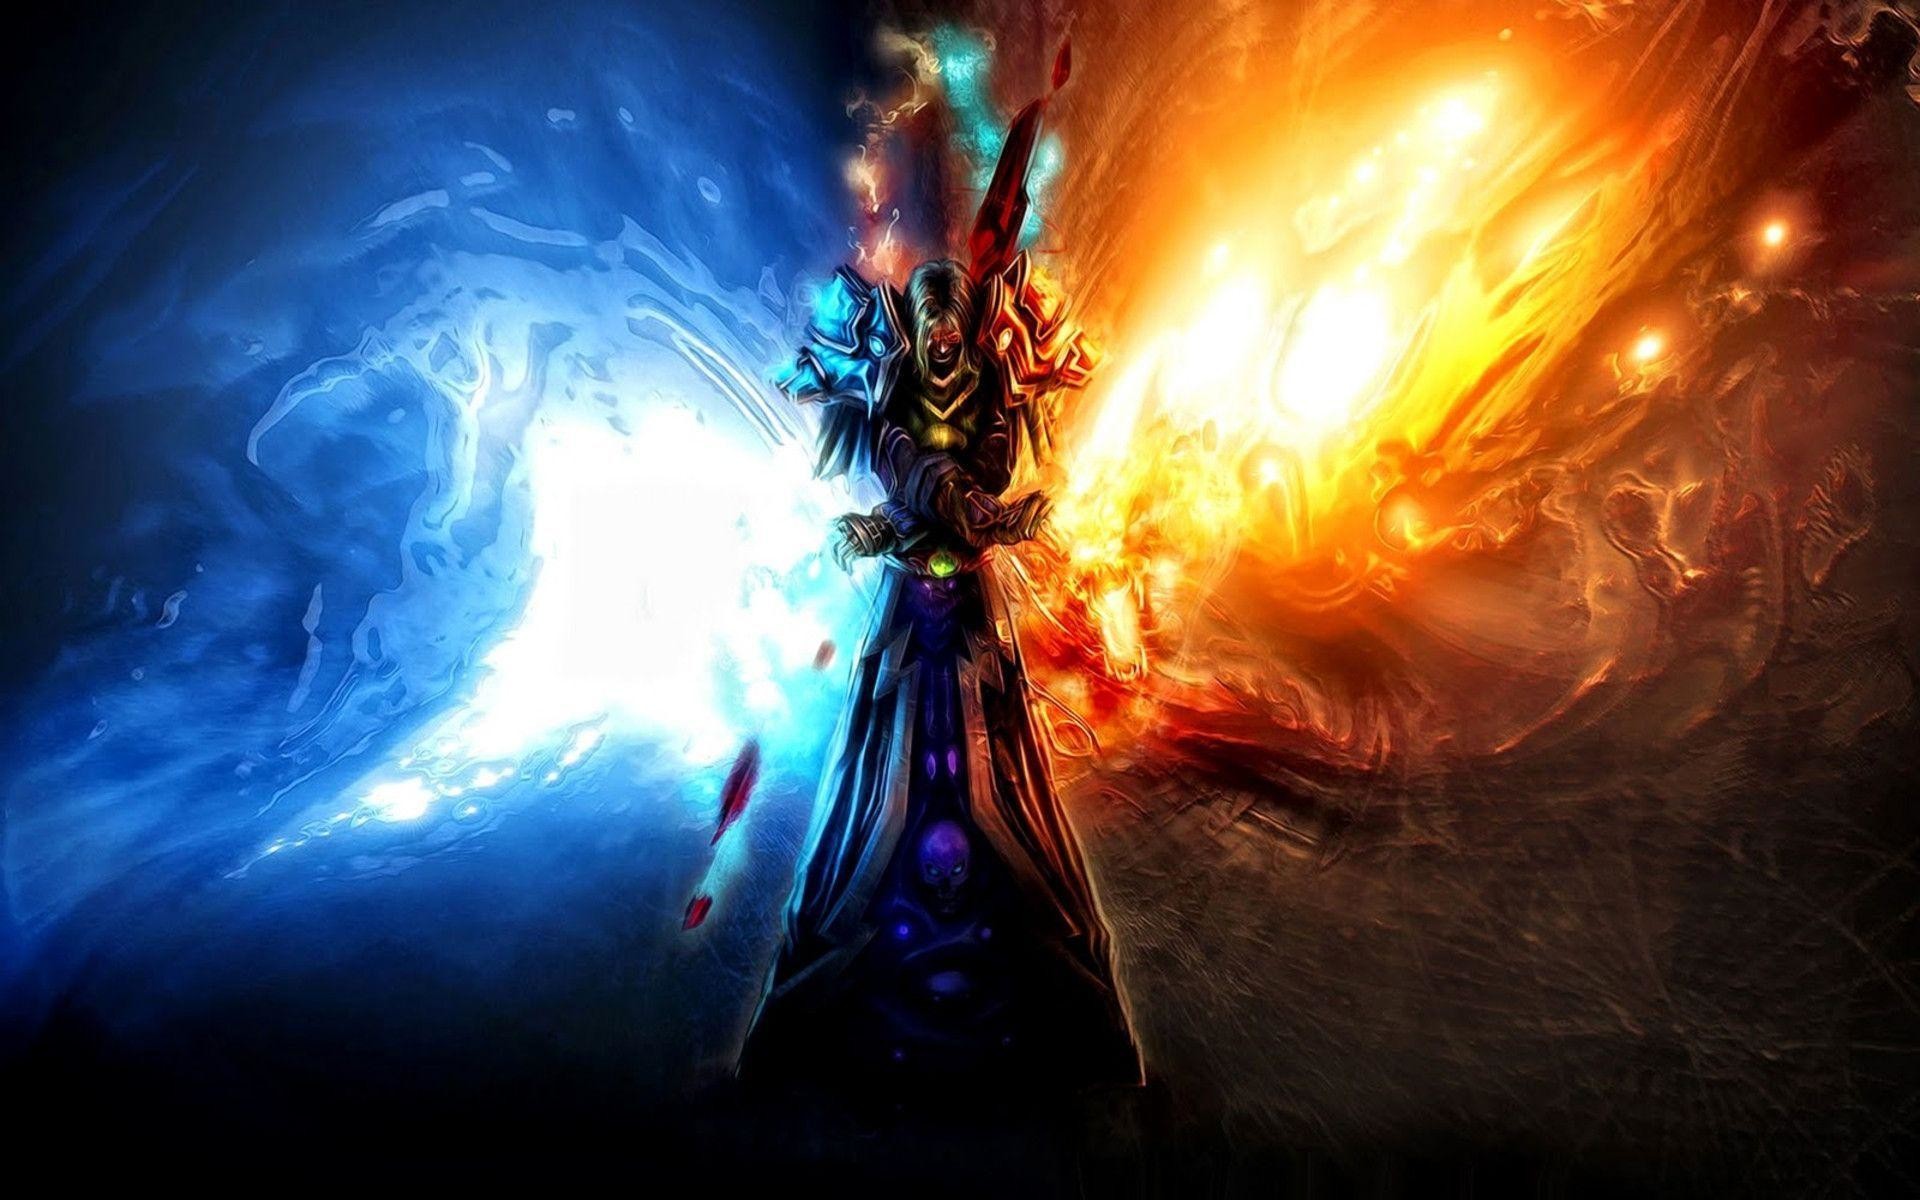 1920x1200 Net Cool Ice And Fire Backgrounds Awesome Fire Backgrounds - Wallpaper Cave  Cool Ice And Fire Backgrounds ...